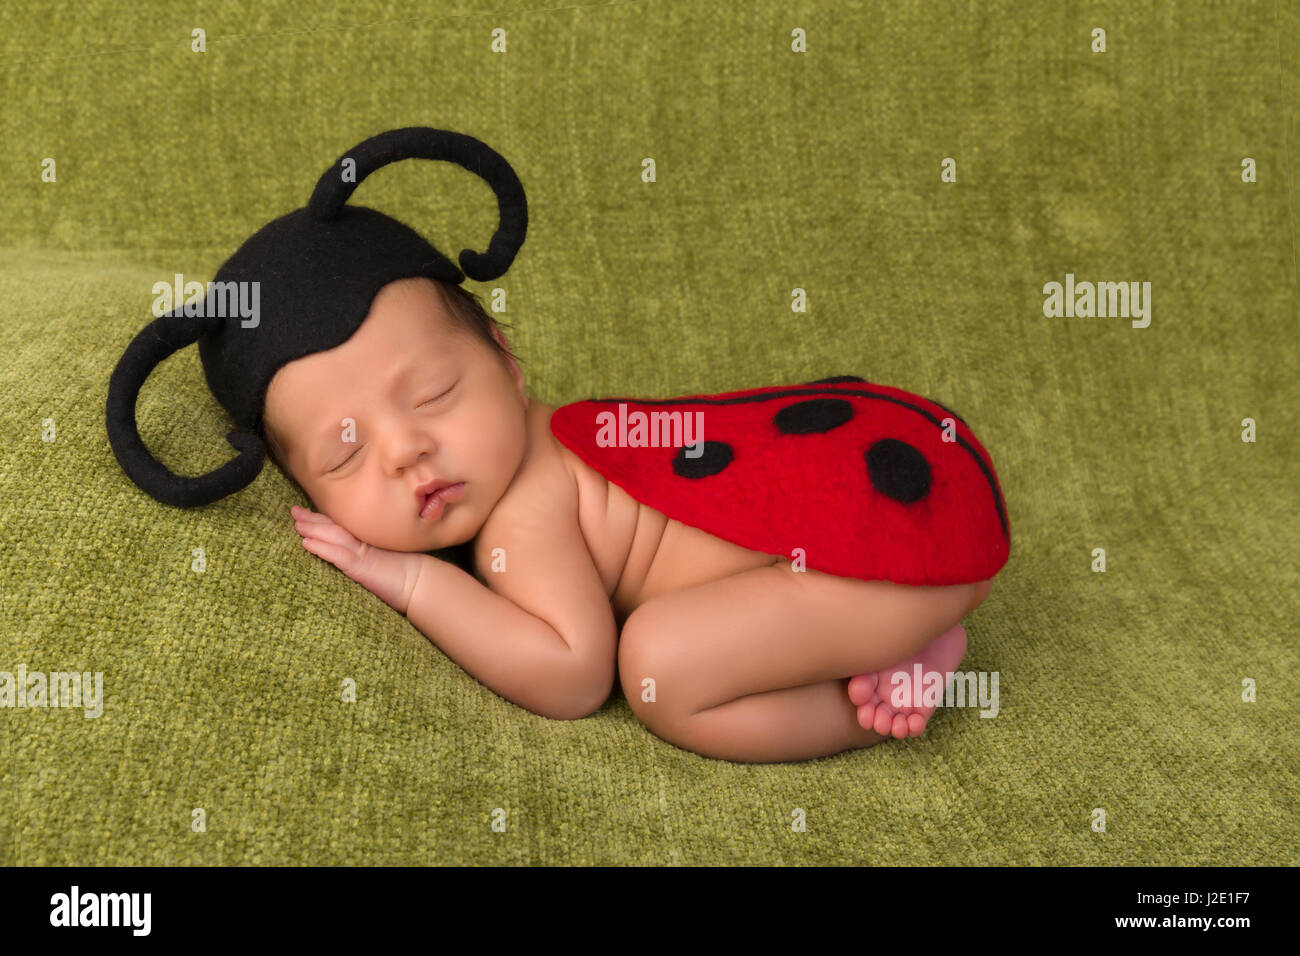 Adorable African newborn baby of 7 days old sleeping on a green blanket Stock Photo